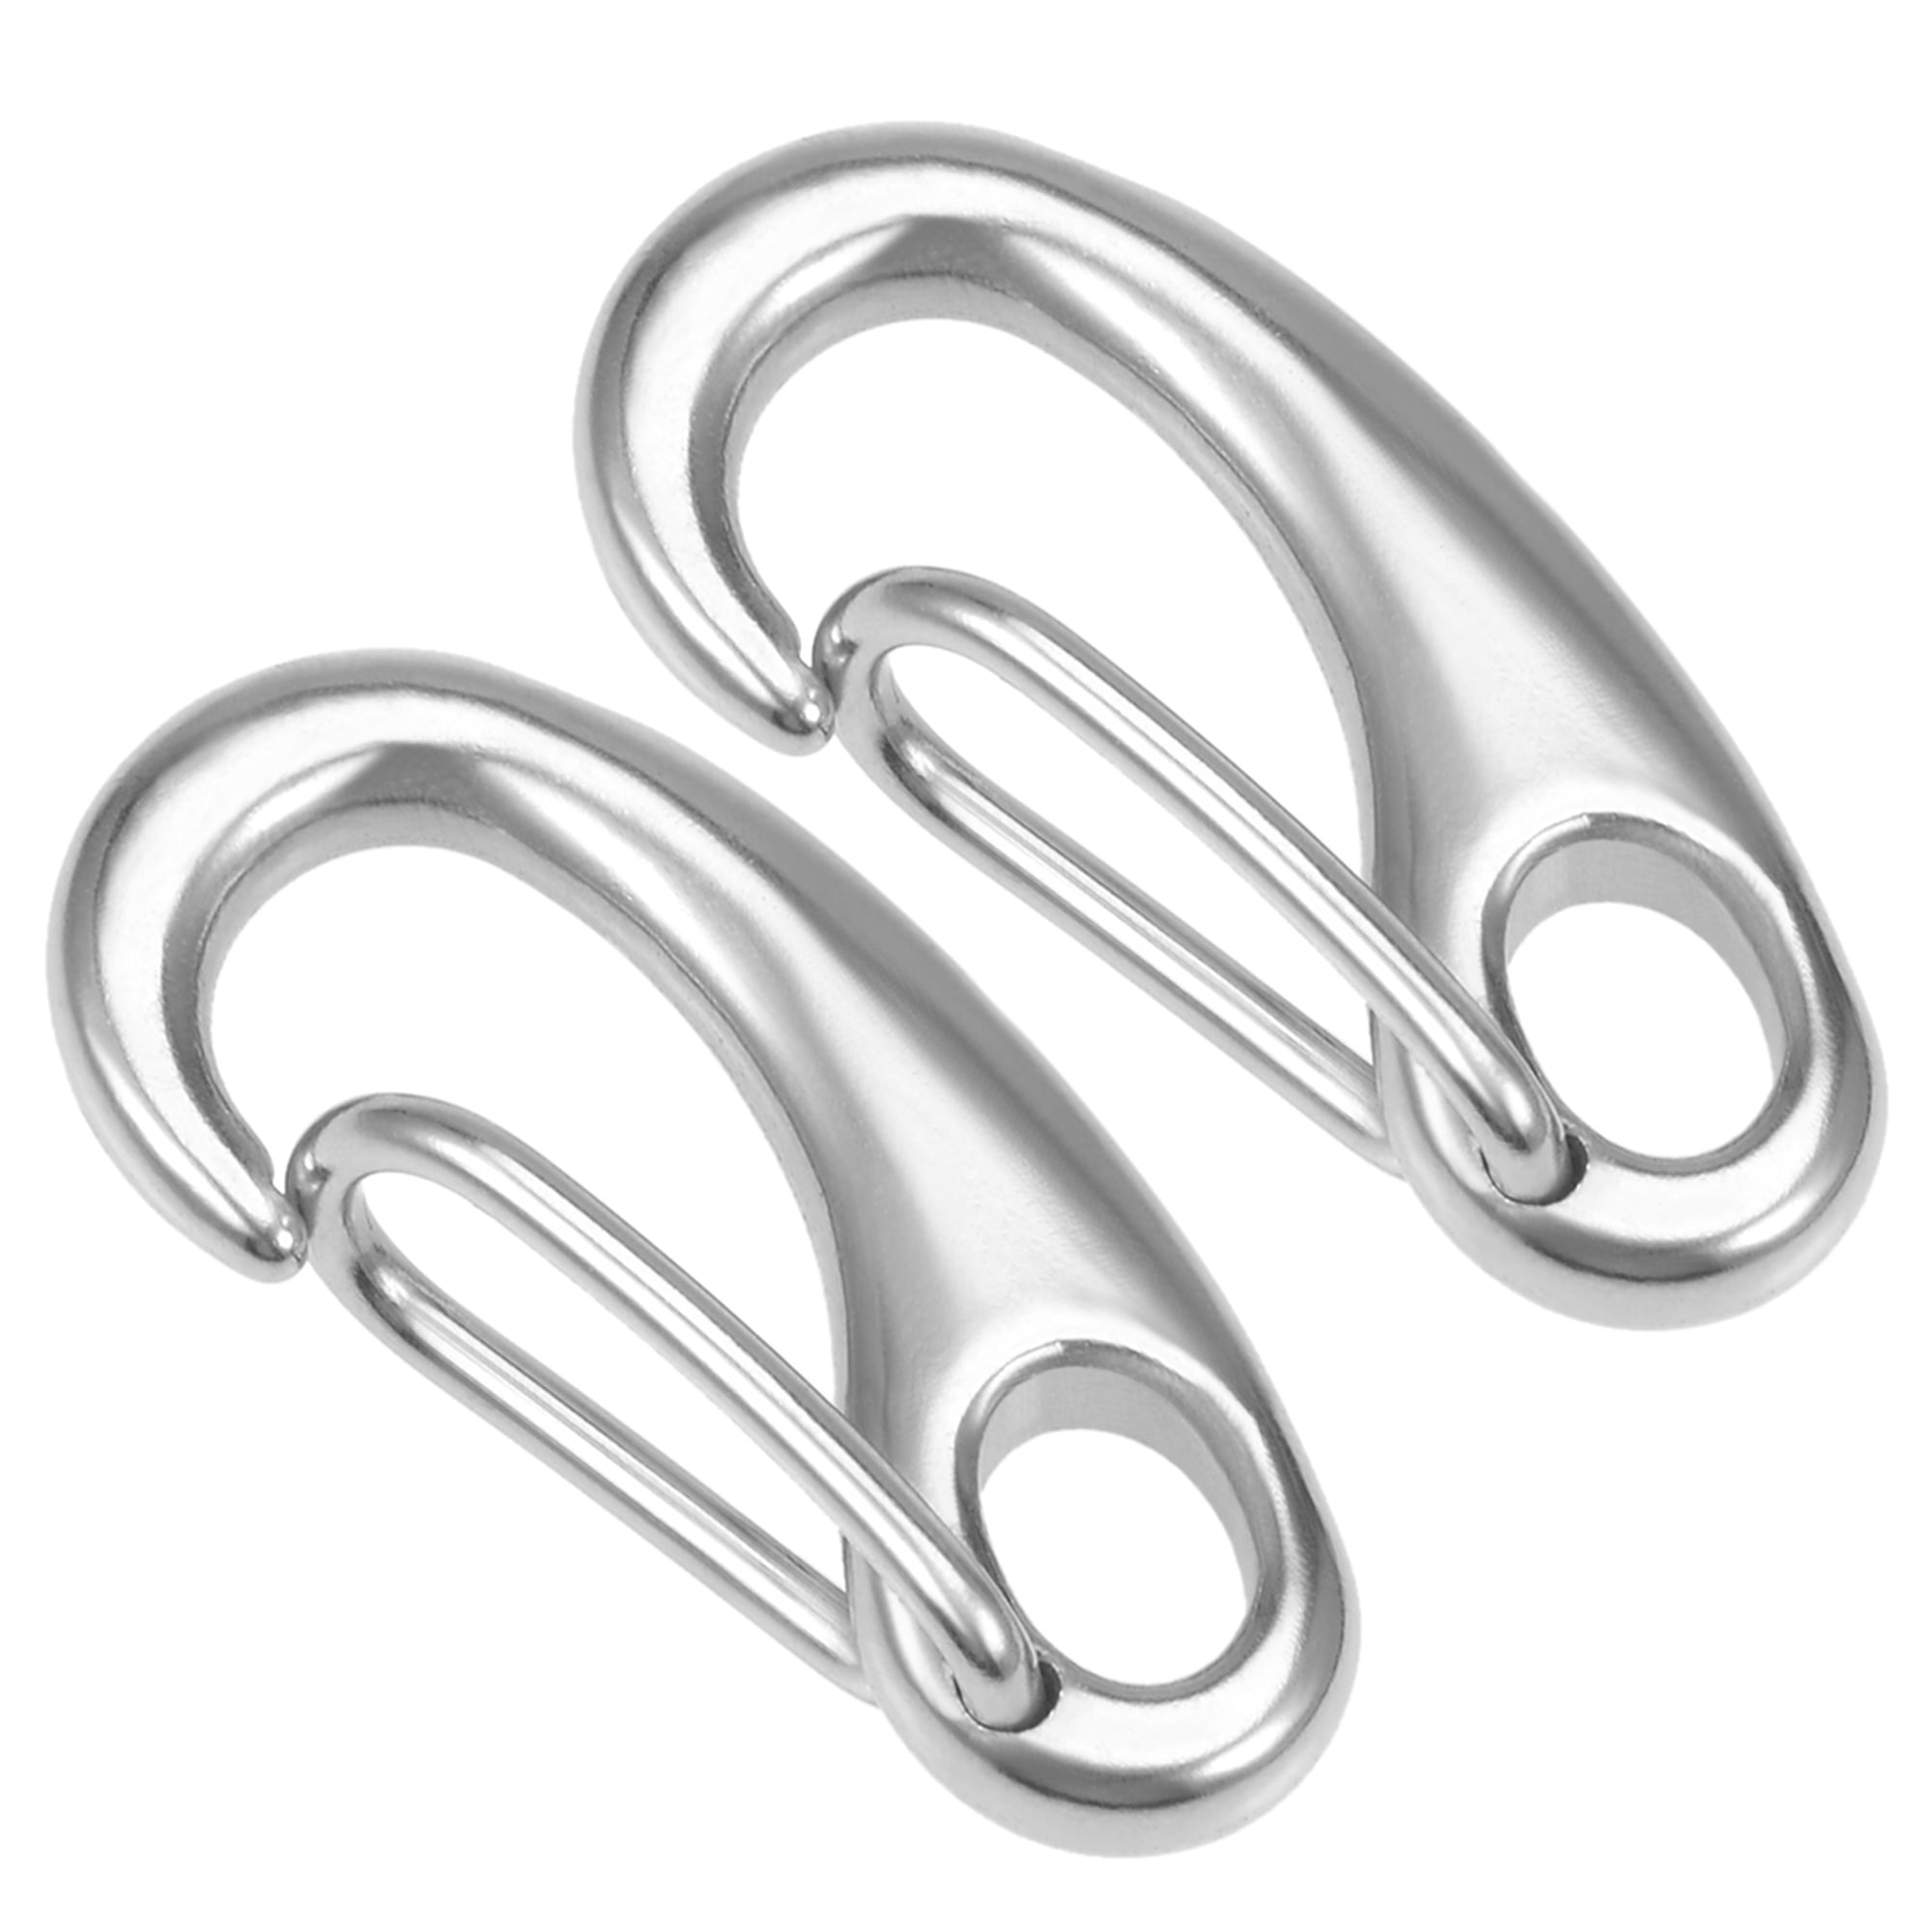 4cm and 5cm Pack of 2 Boat Marine Clip Stainless Steel Snap Hook Carabiner 